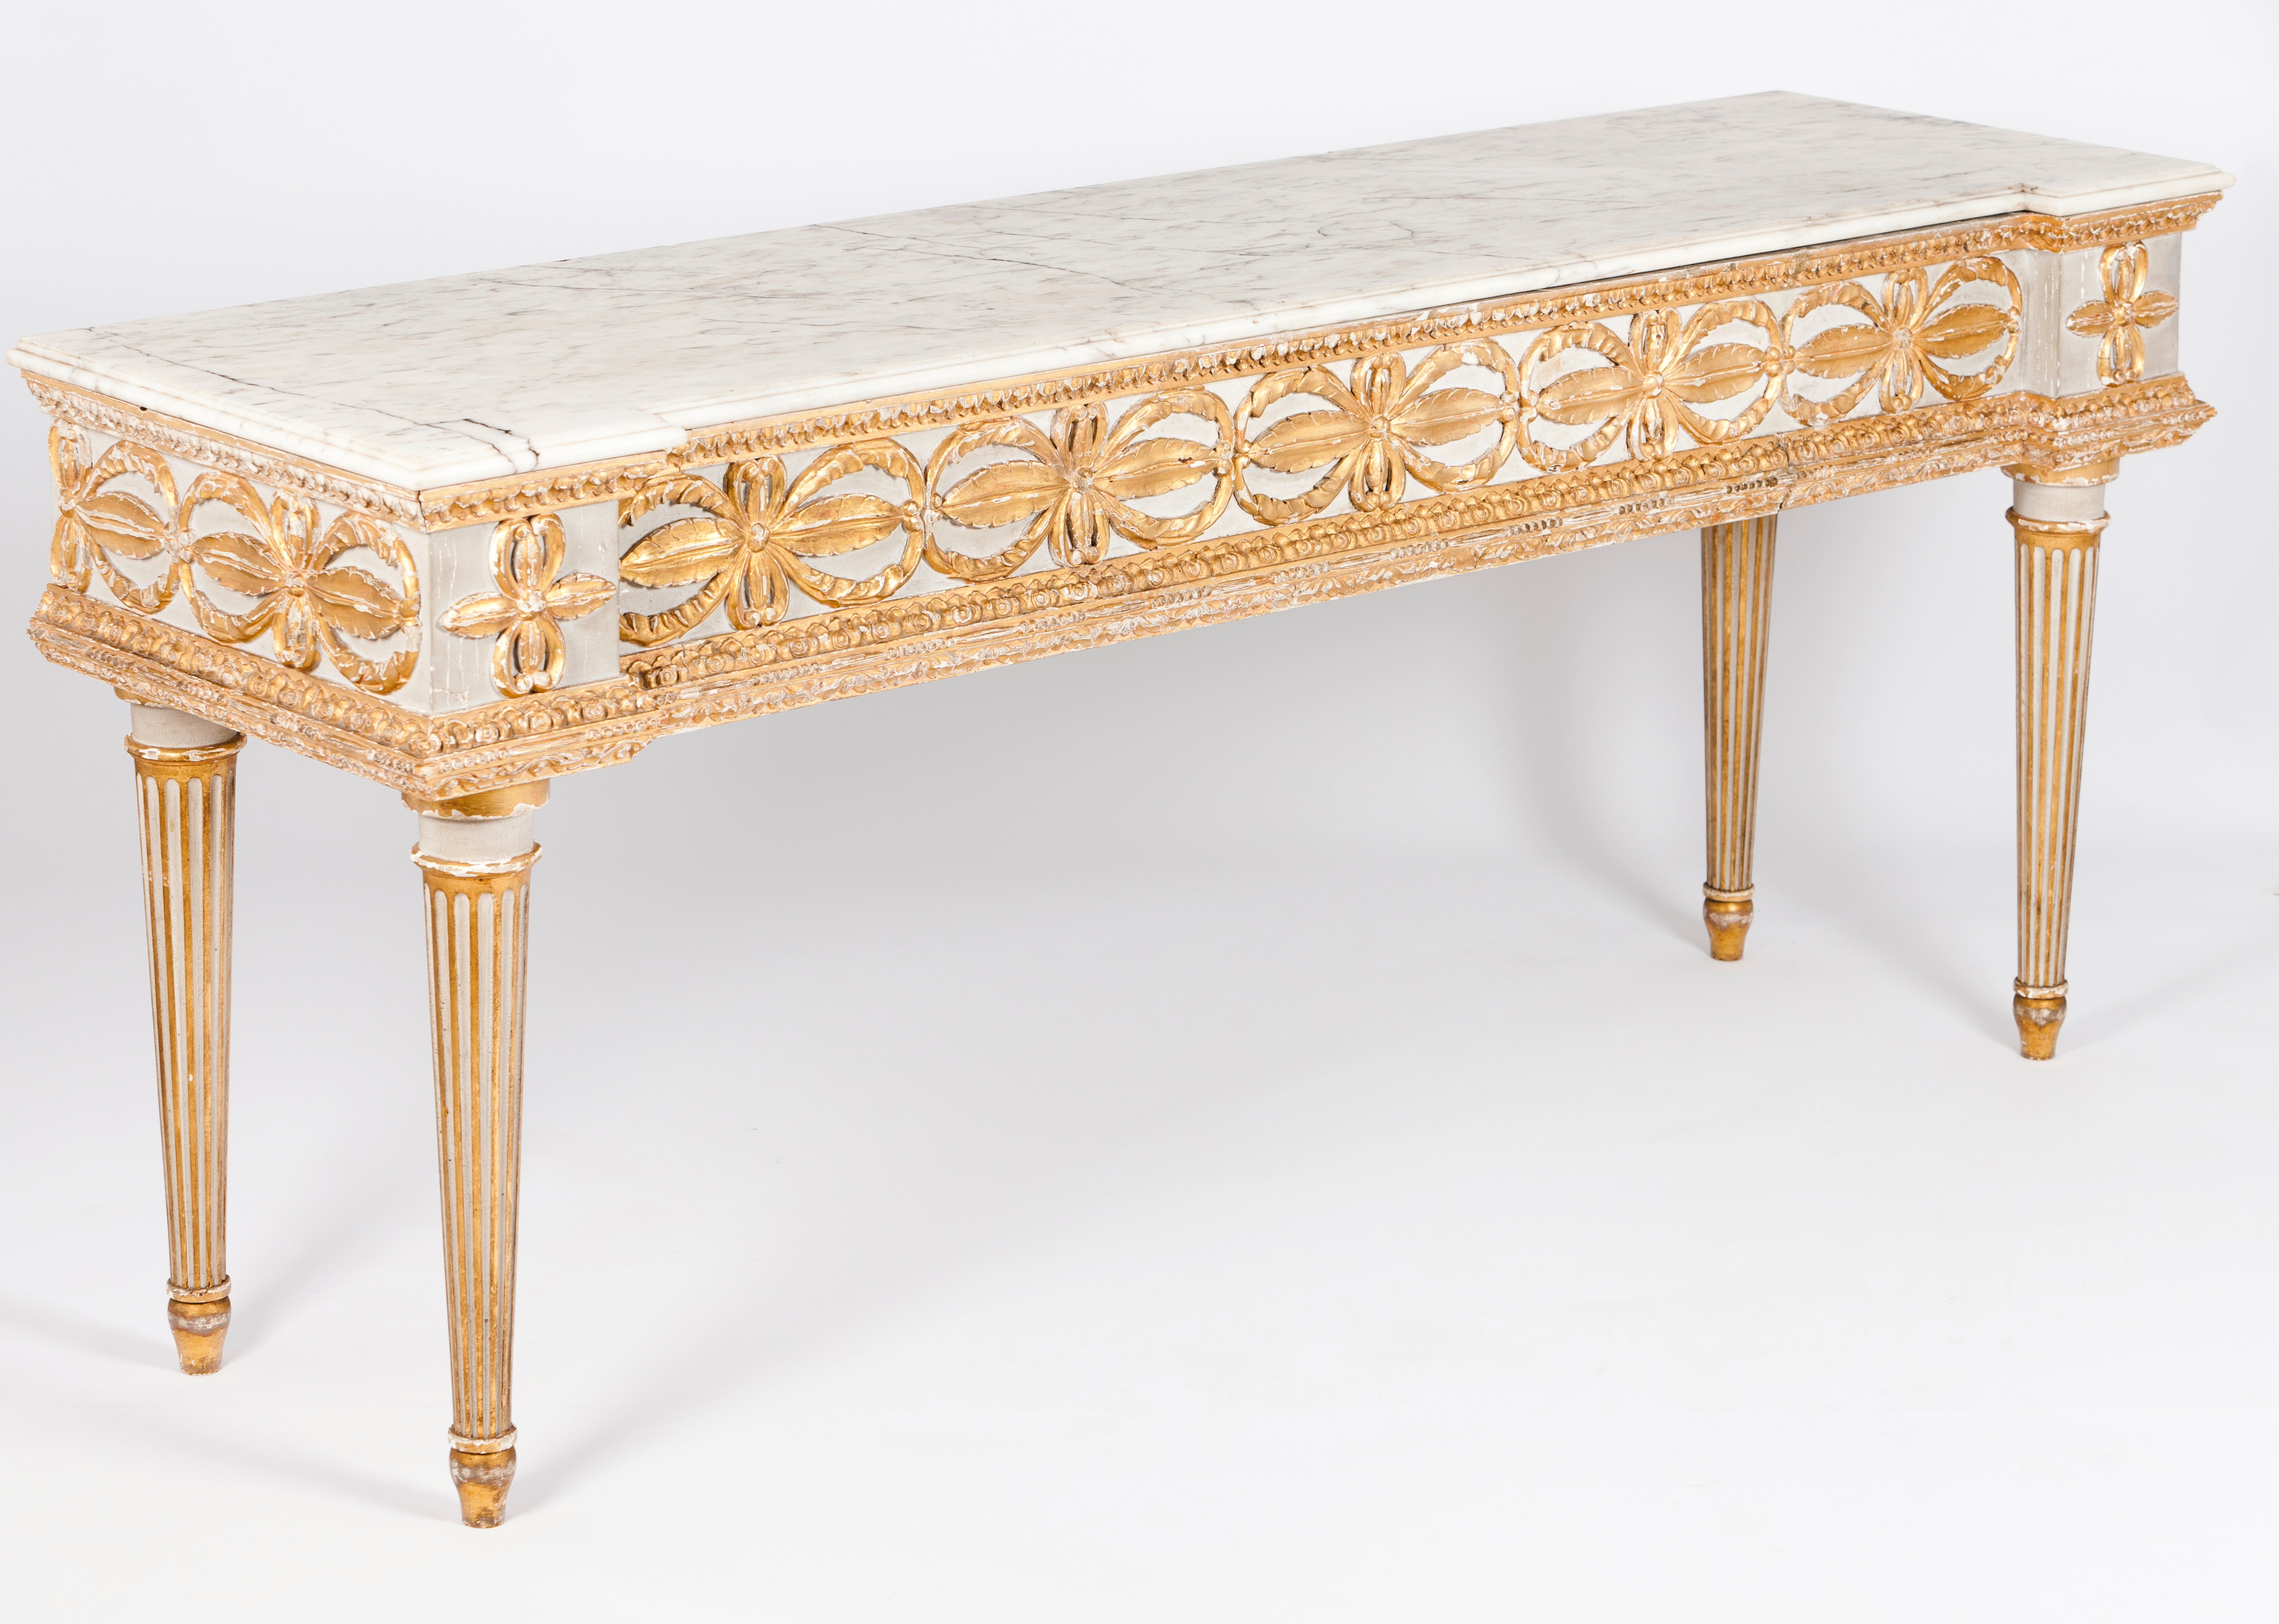 A pair of large credence tablesLacquered and gilt wood Carved and fluted decoration with foliage